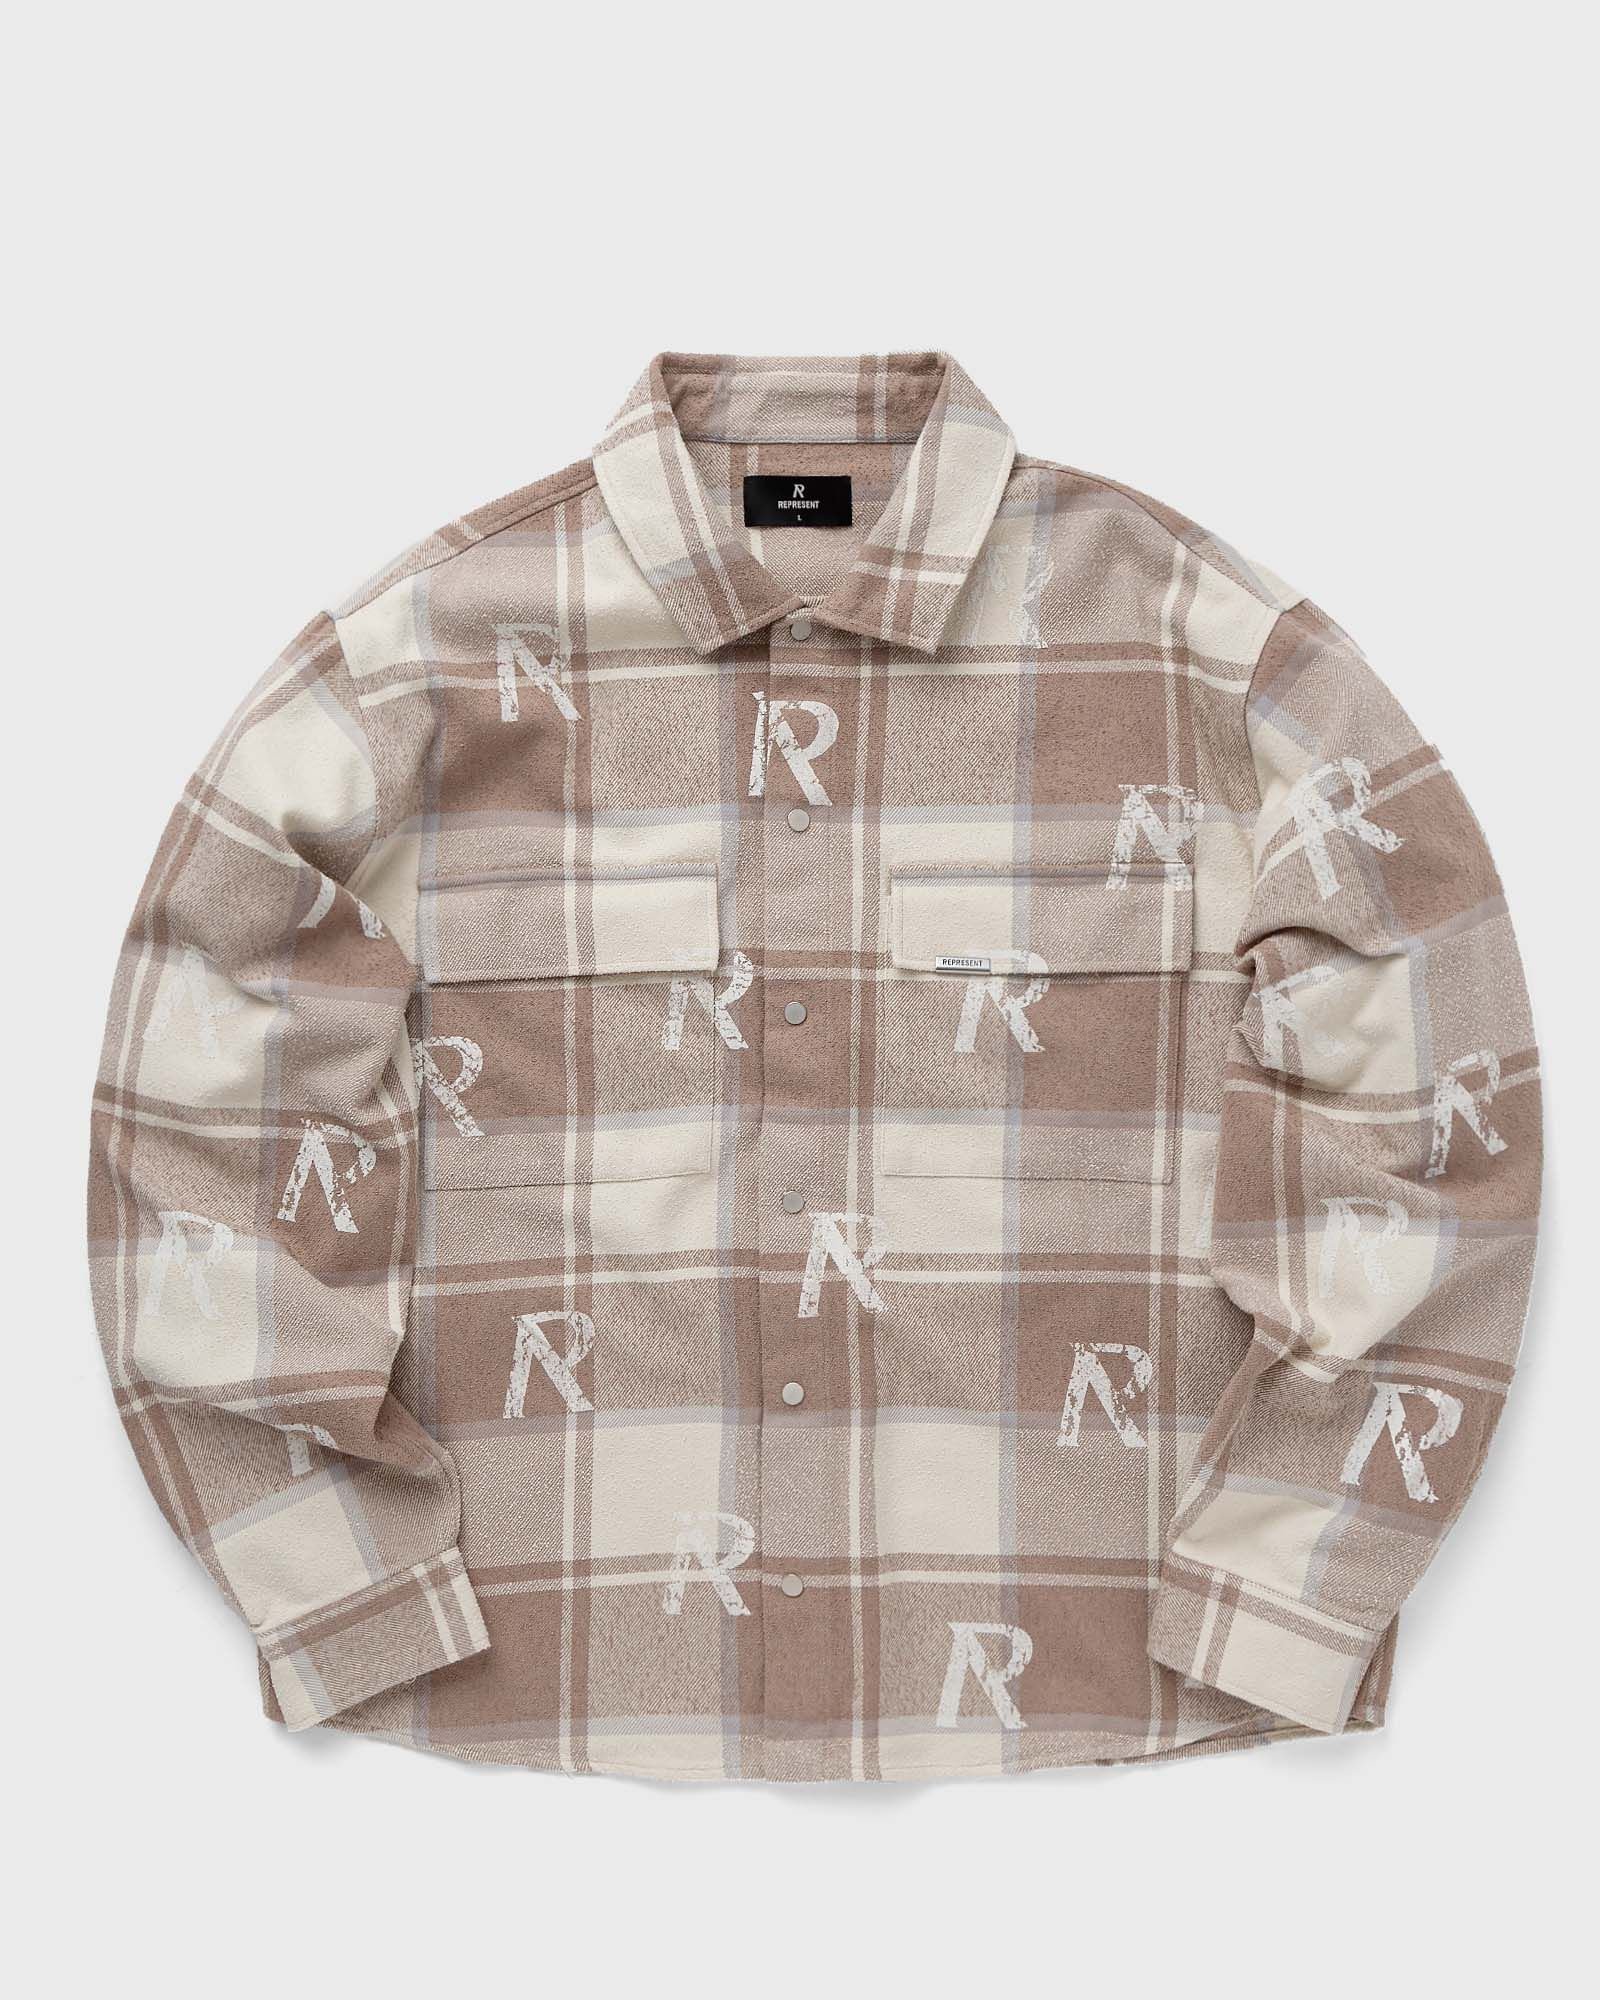 Represent ALL OVER INITIAL FLANNEL SHIRT